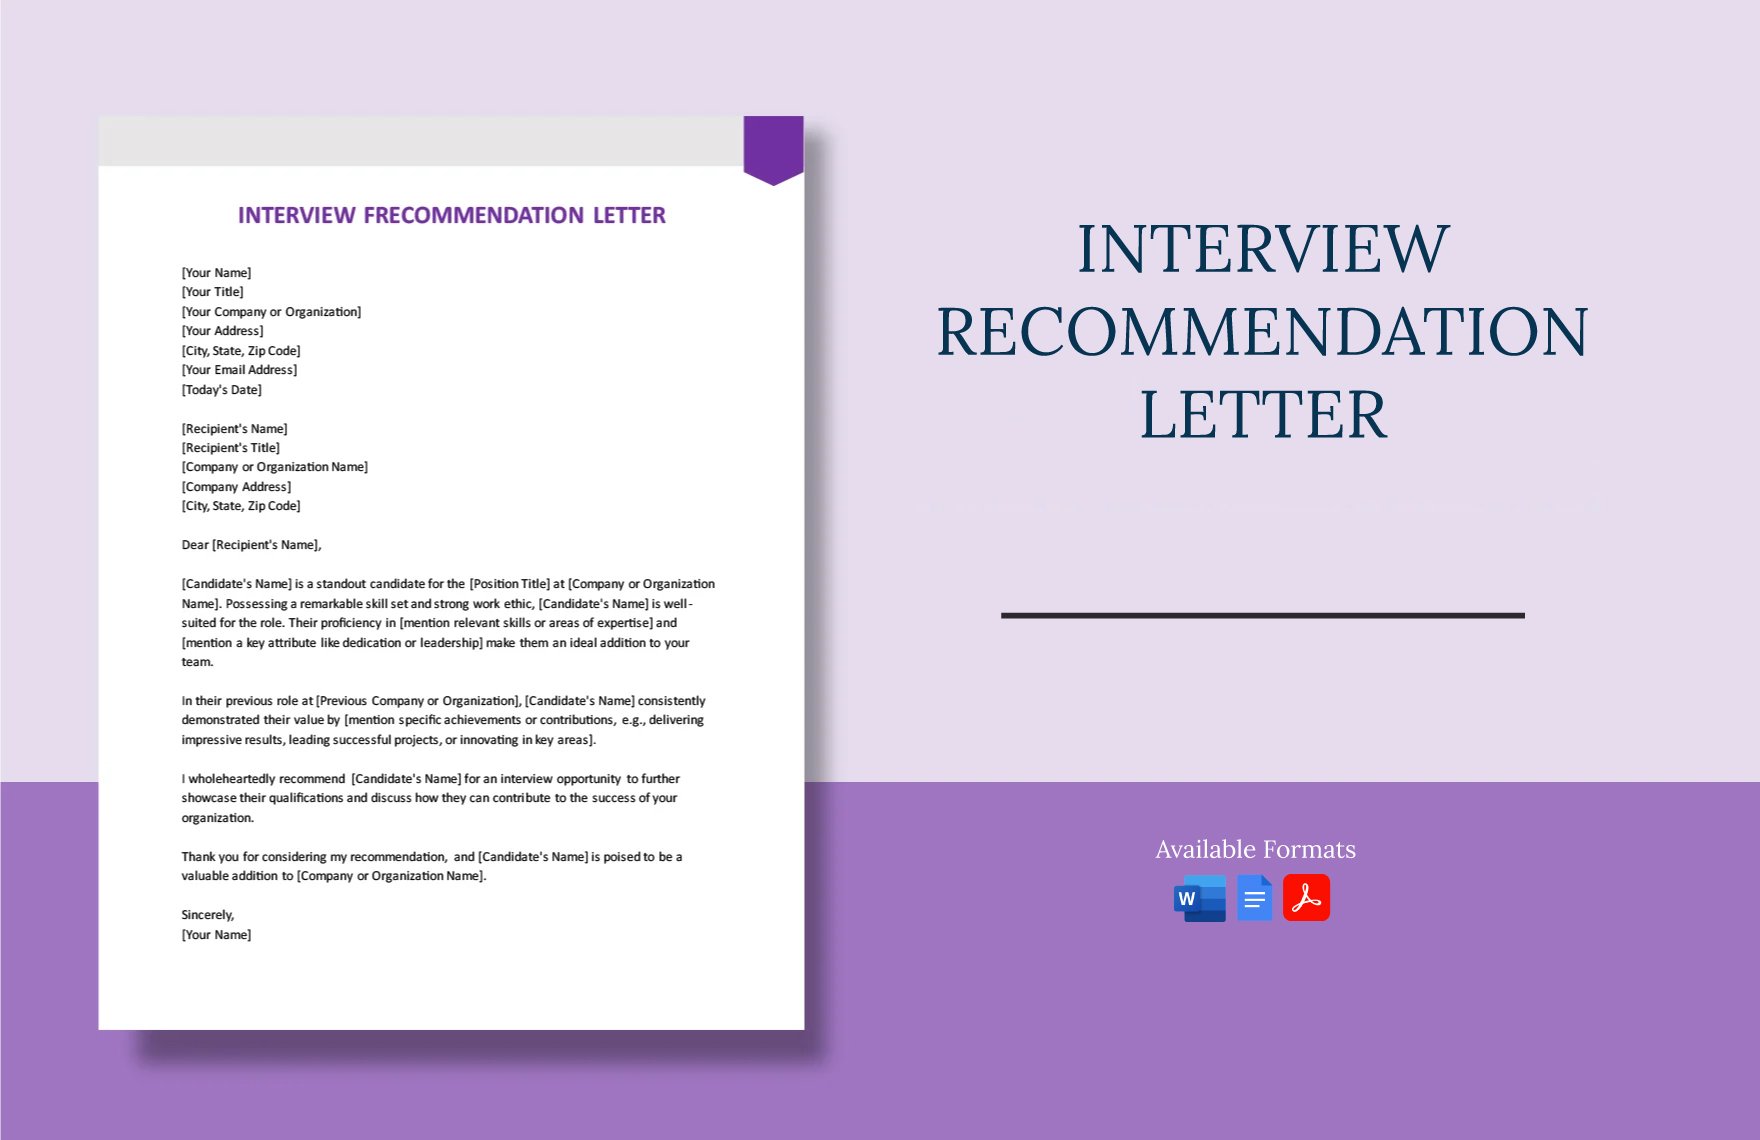 Interview Recommendation Letter in Word, Google Docs, PDF